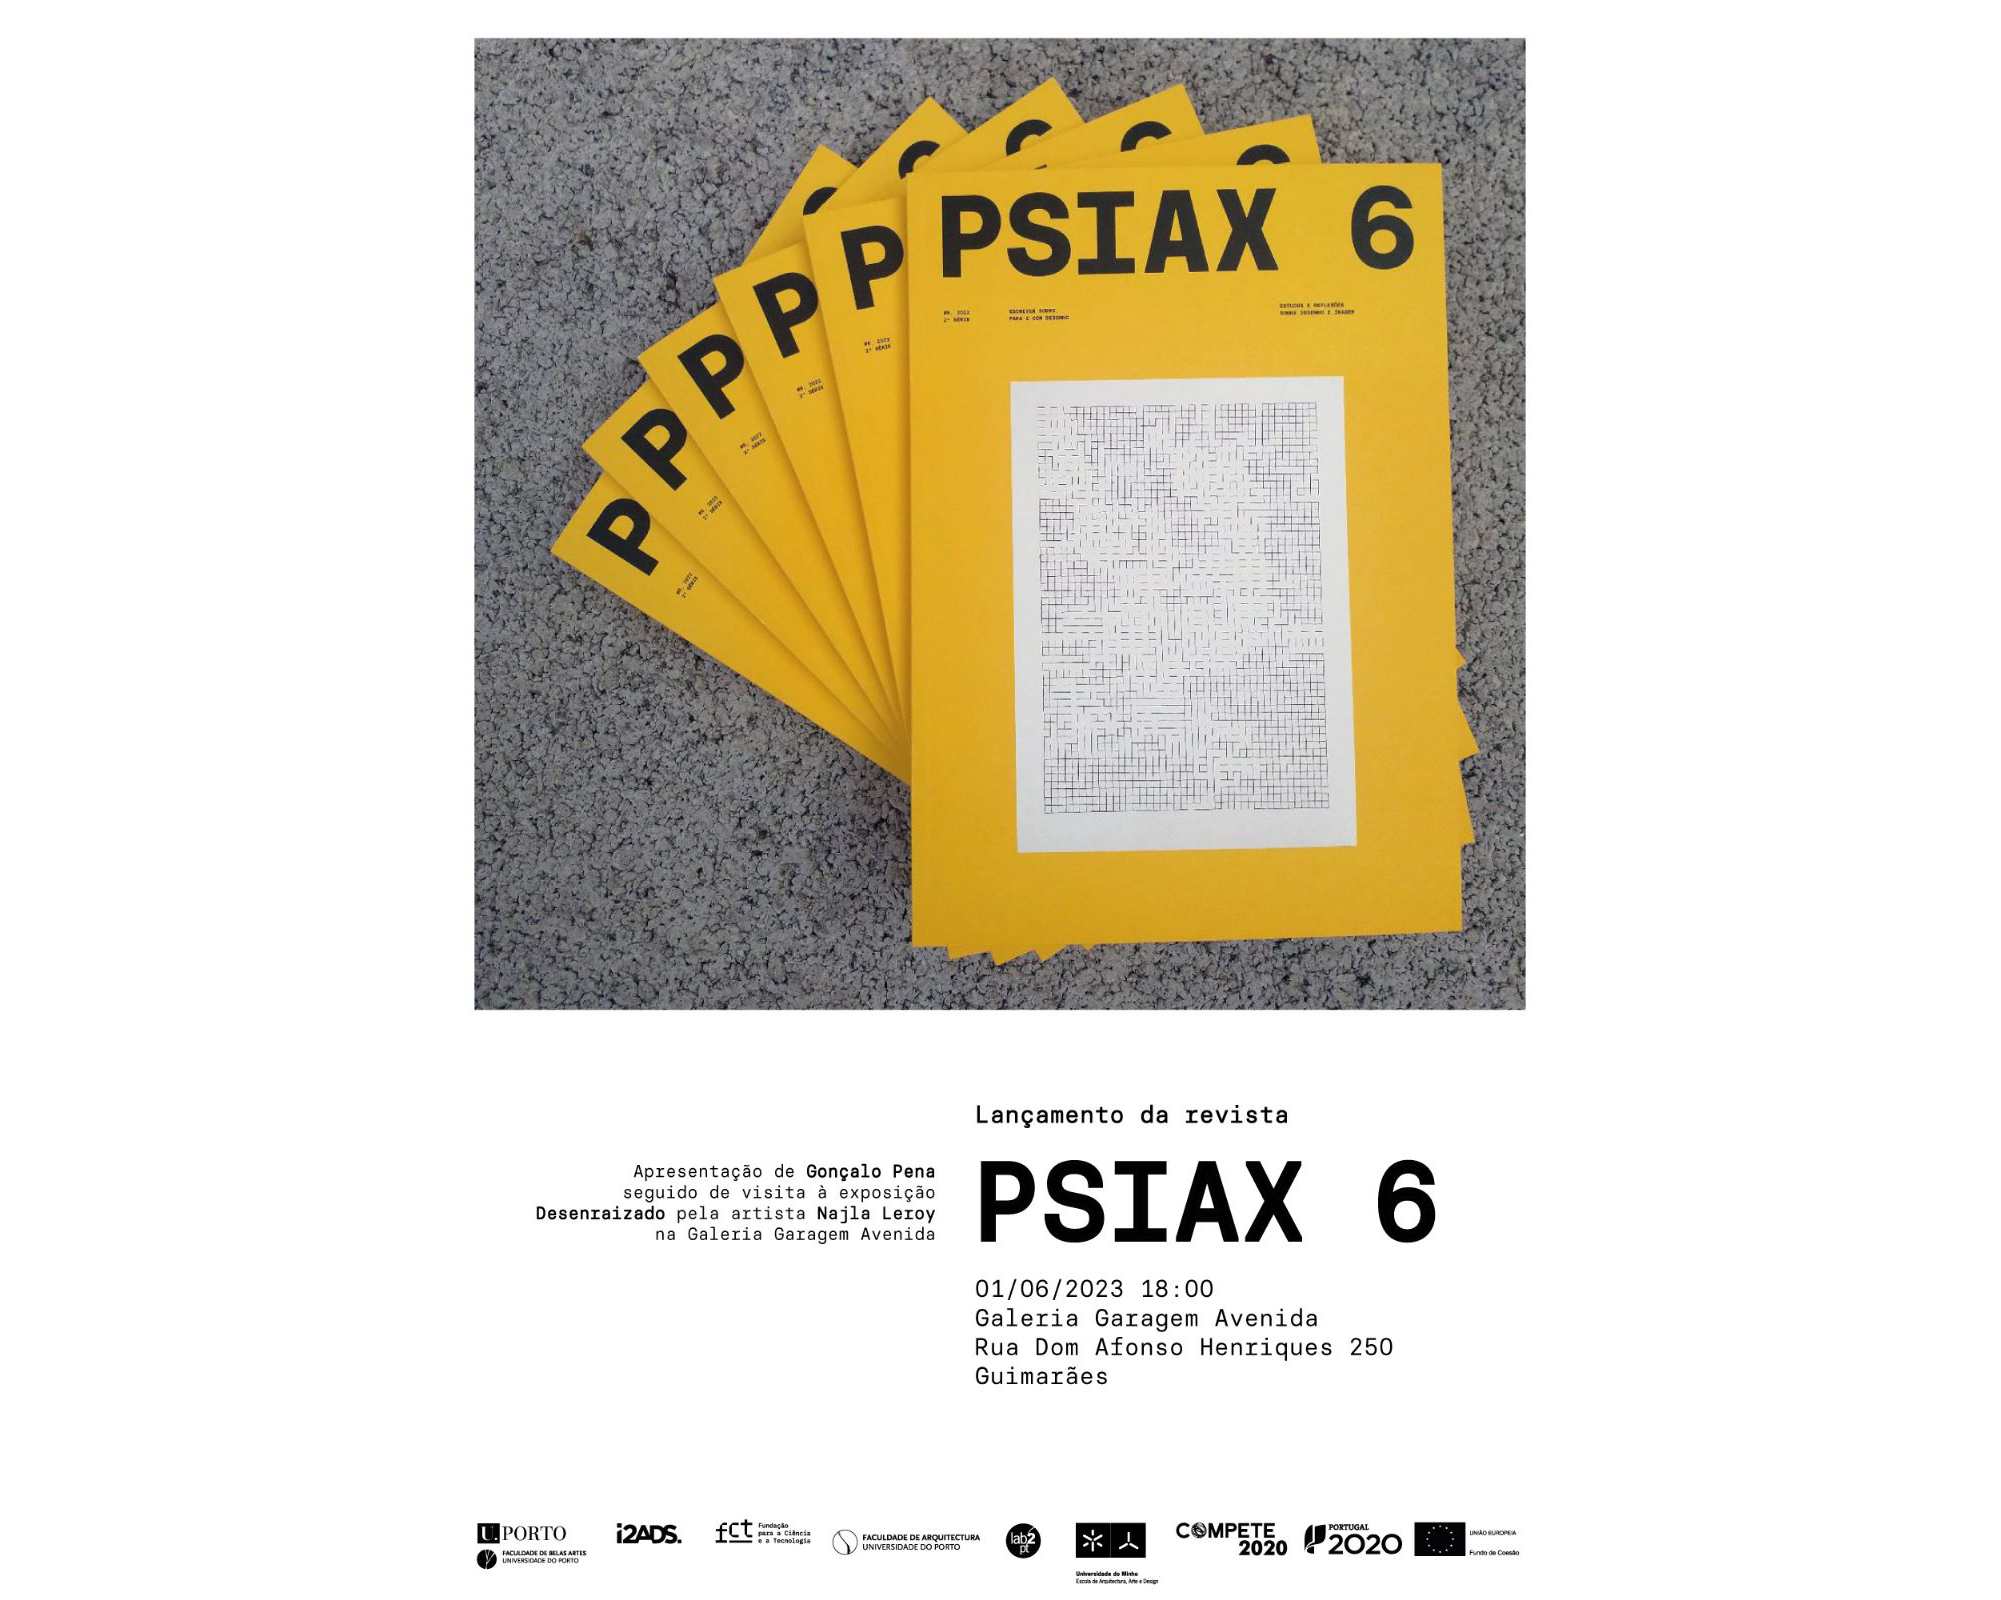 New arrival of PSIAX Journal#6 - studies and reflections on drawing and image image